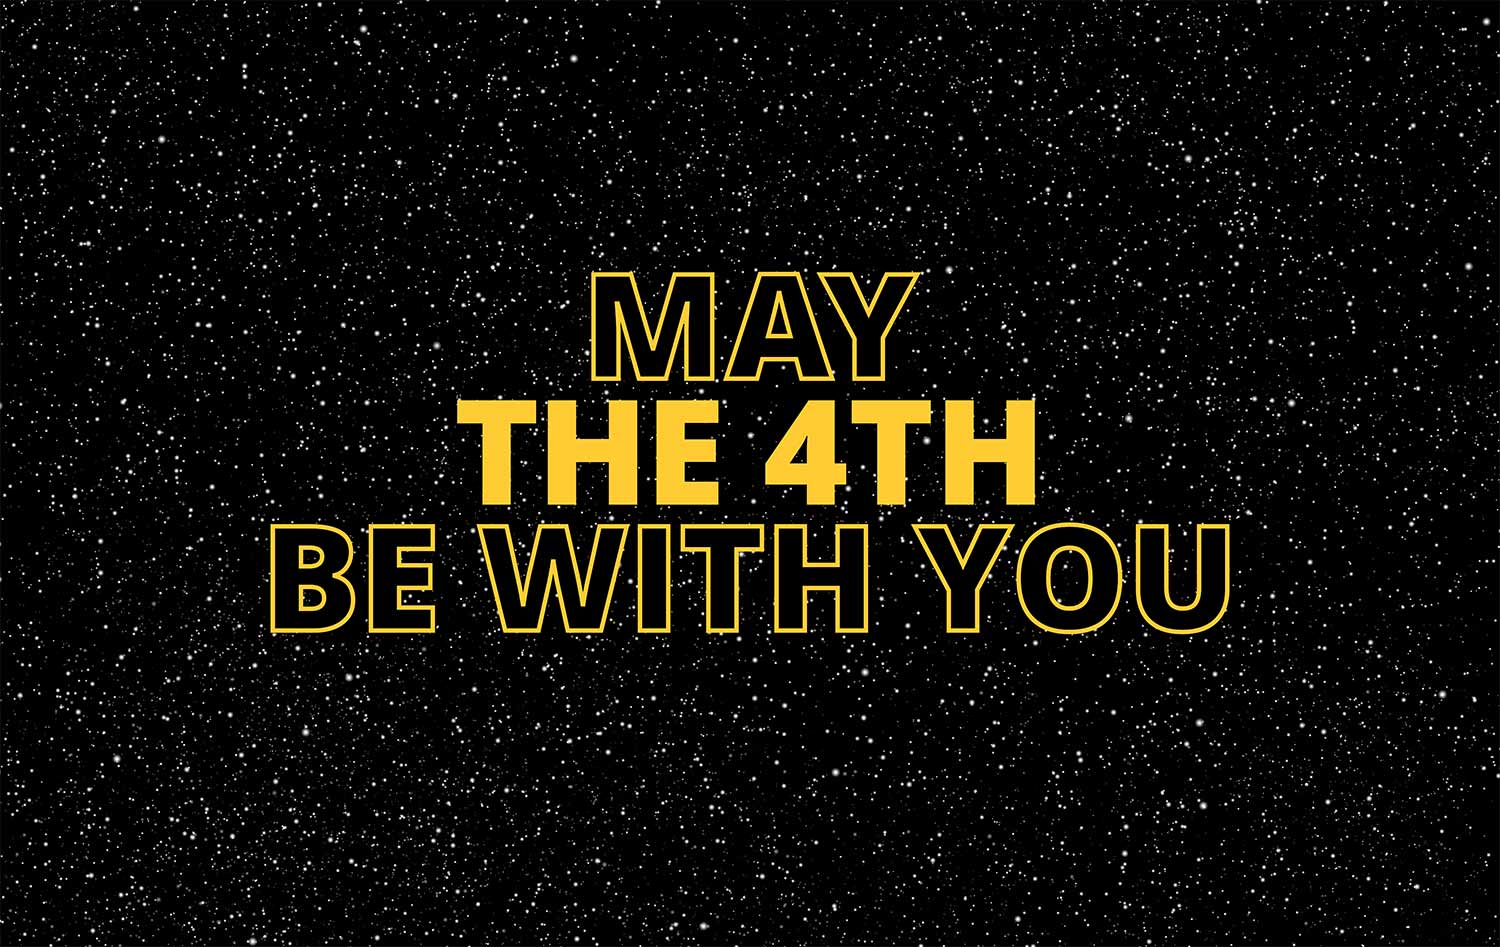 May the 4th be with you! - Relevant Radio